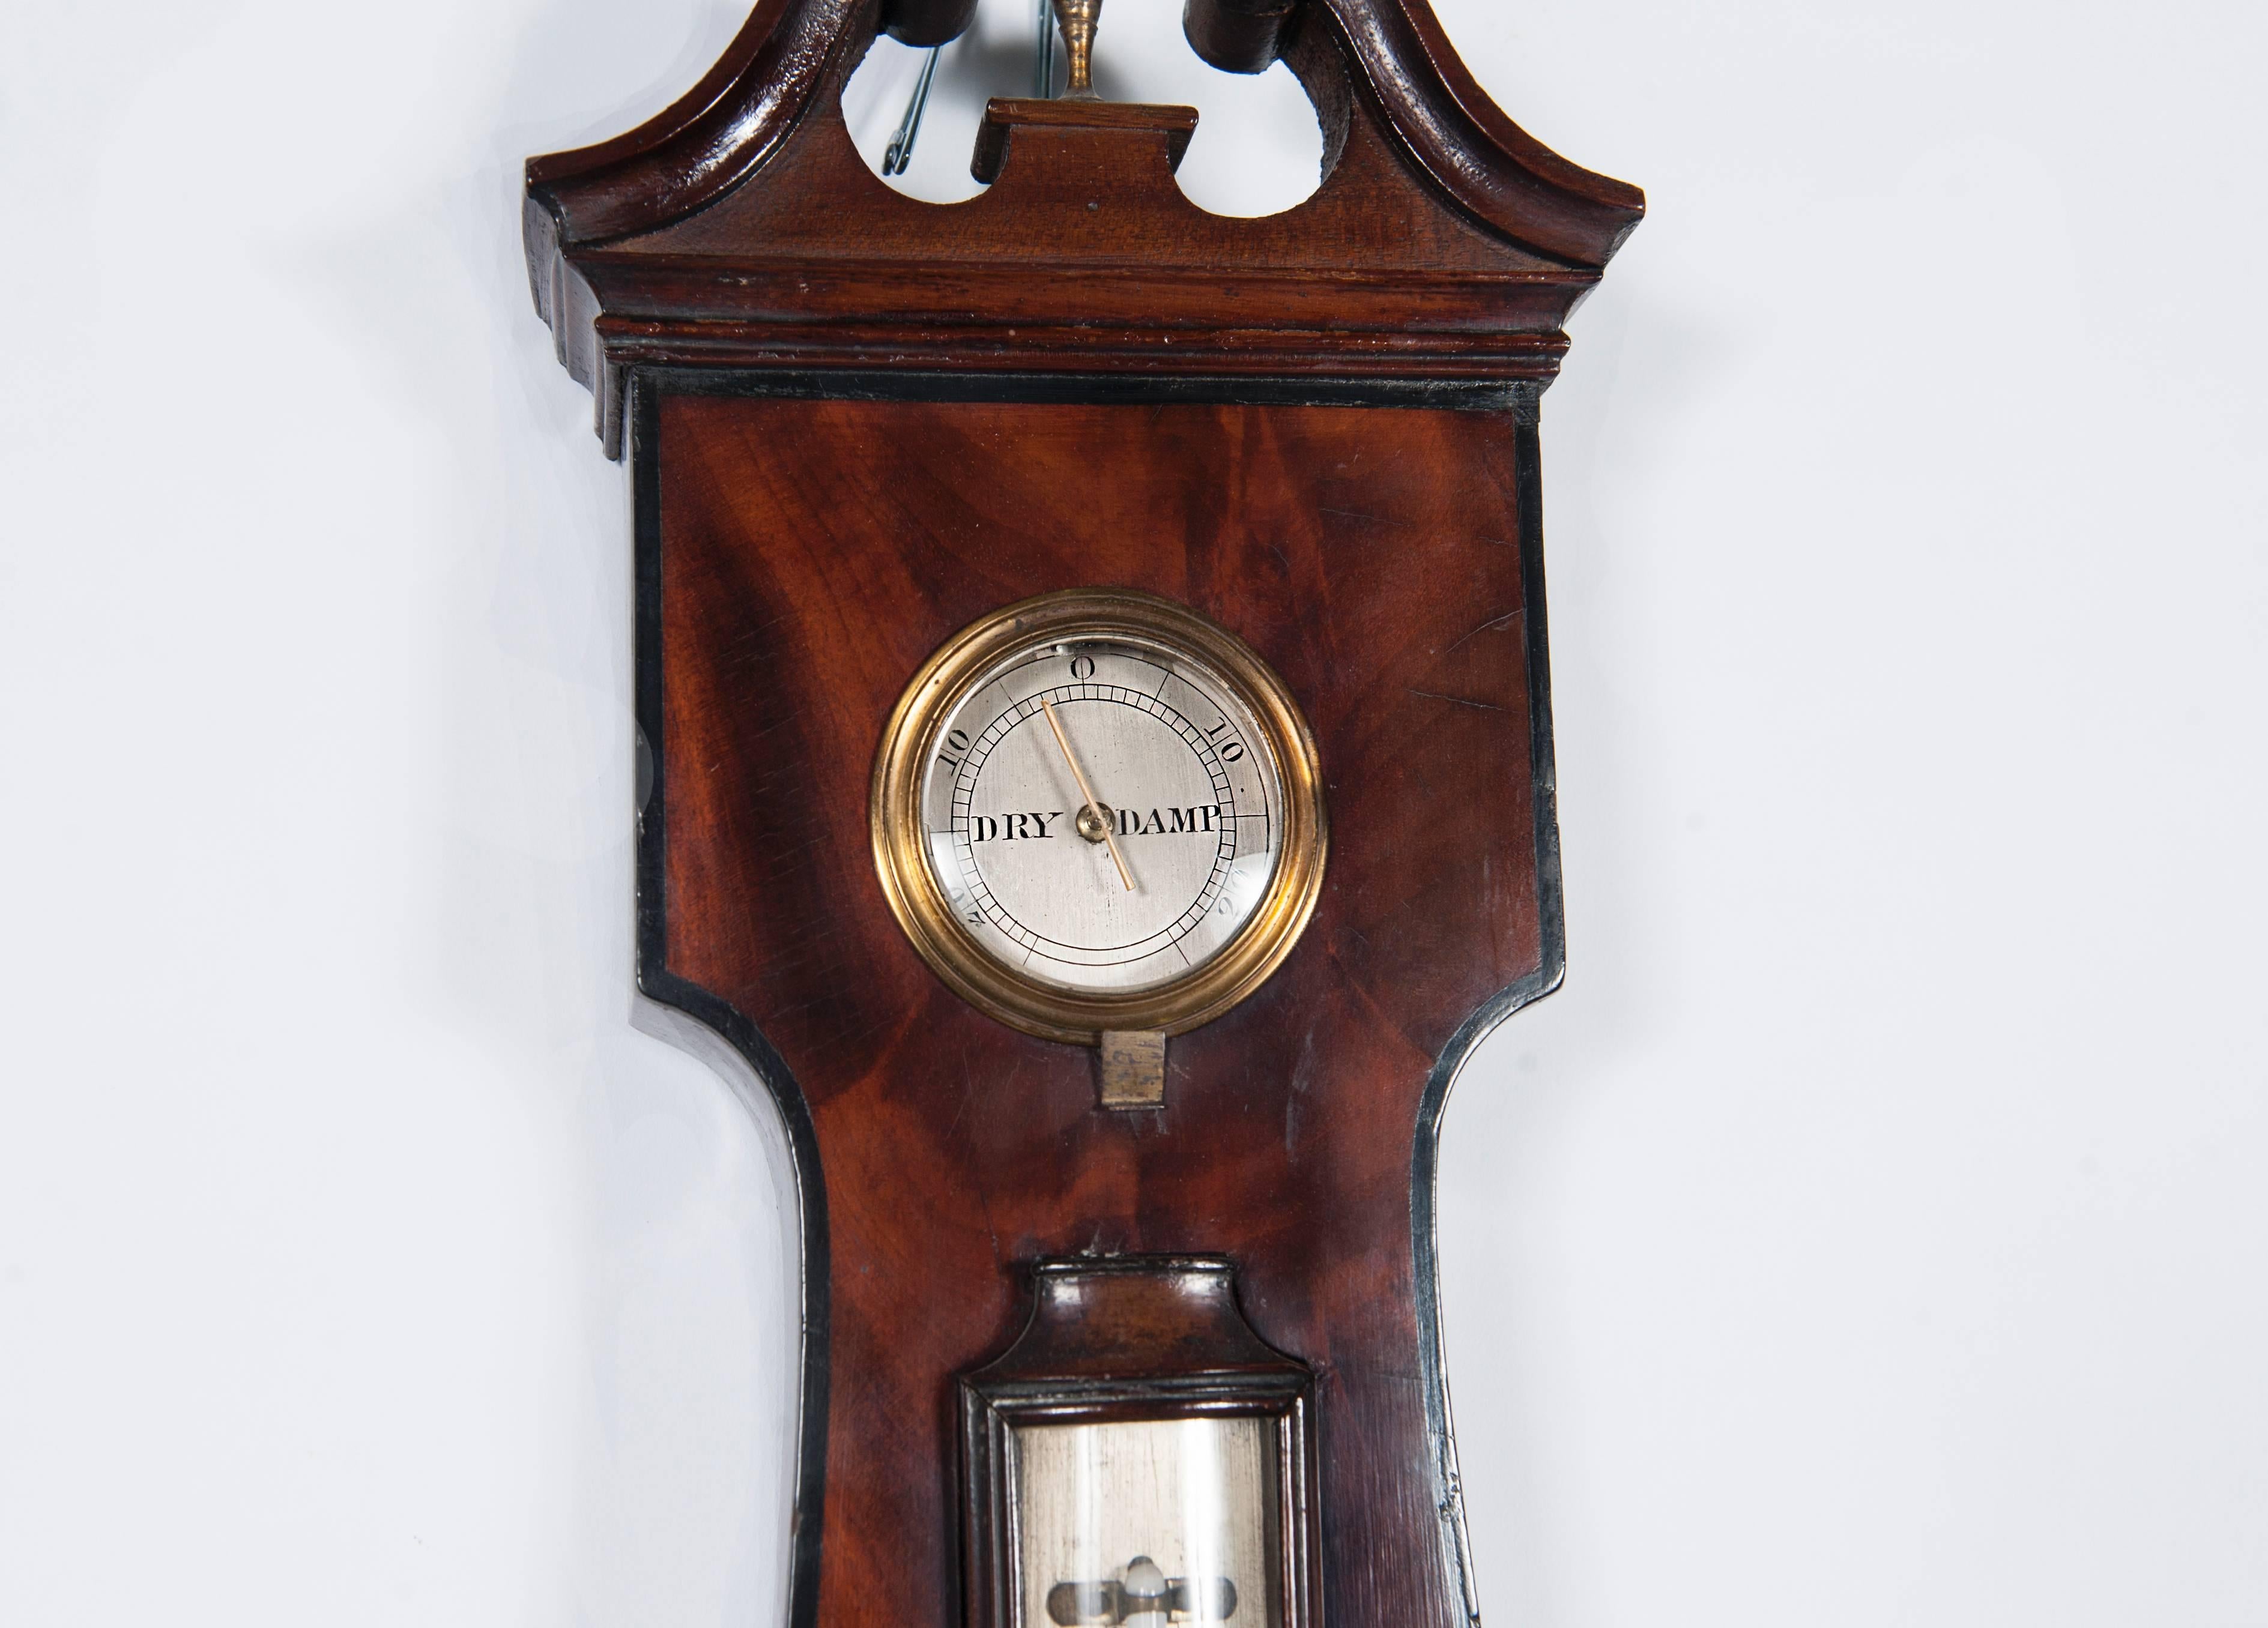 An imposing king-size wheel barometer by "Tarelli" New Castle, engraved silvered plates Mercury thermometer and separate hygrometer, signed "Tarelli New Castle," blue steel hand and brass vernier. Mahogany case with swan neck top